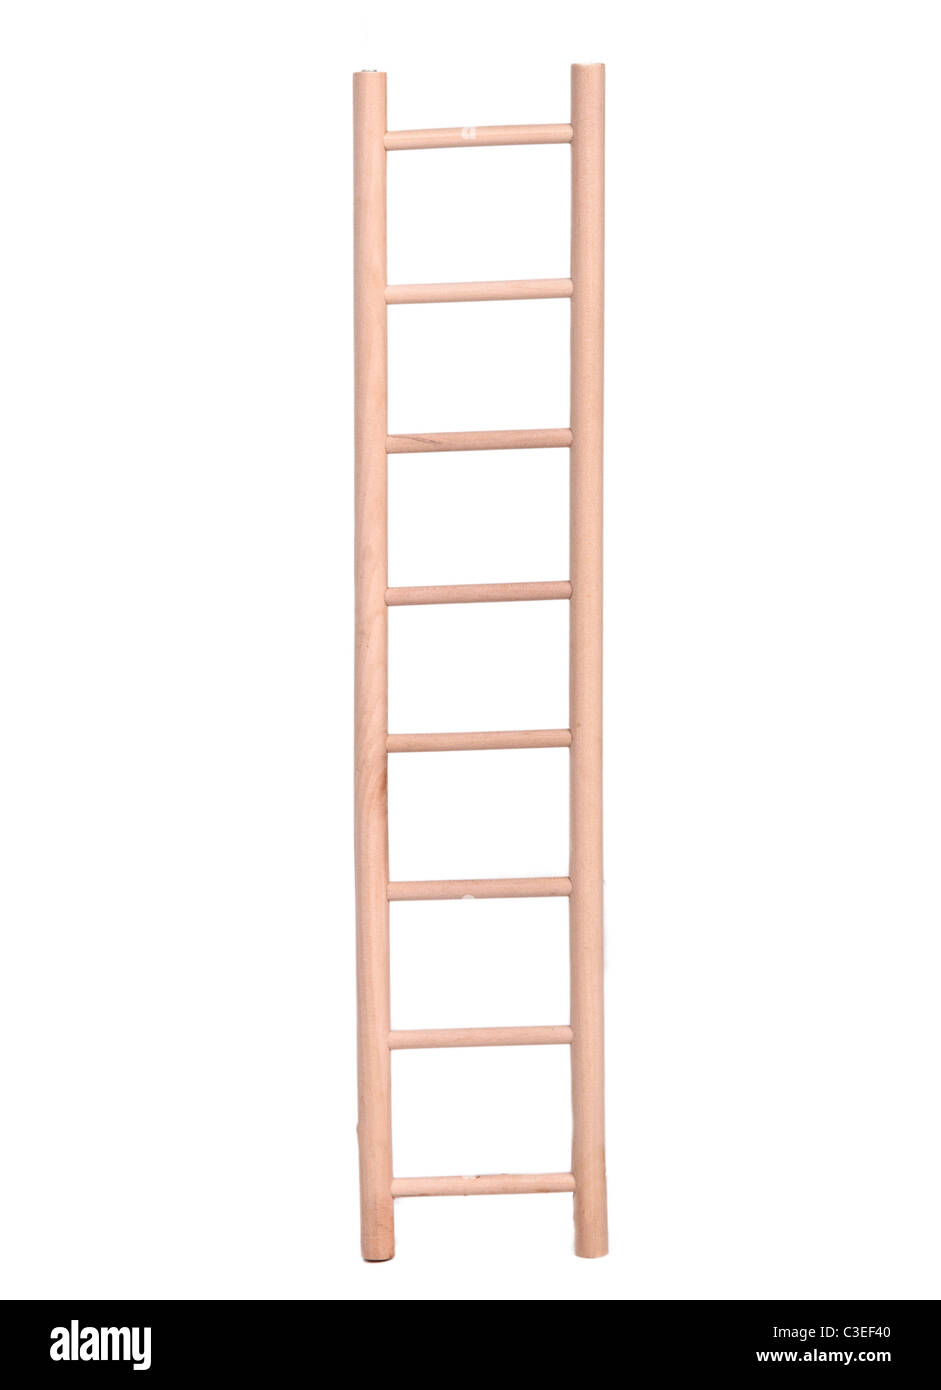 Beige wooden ladder isolated on white background Stock Photo